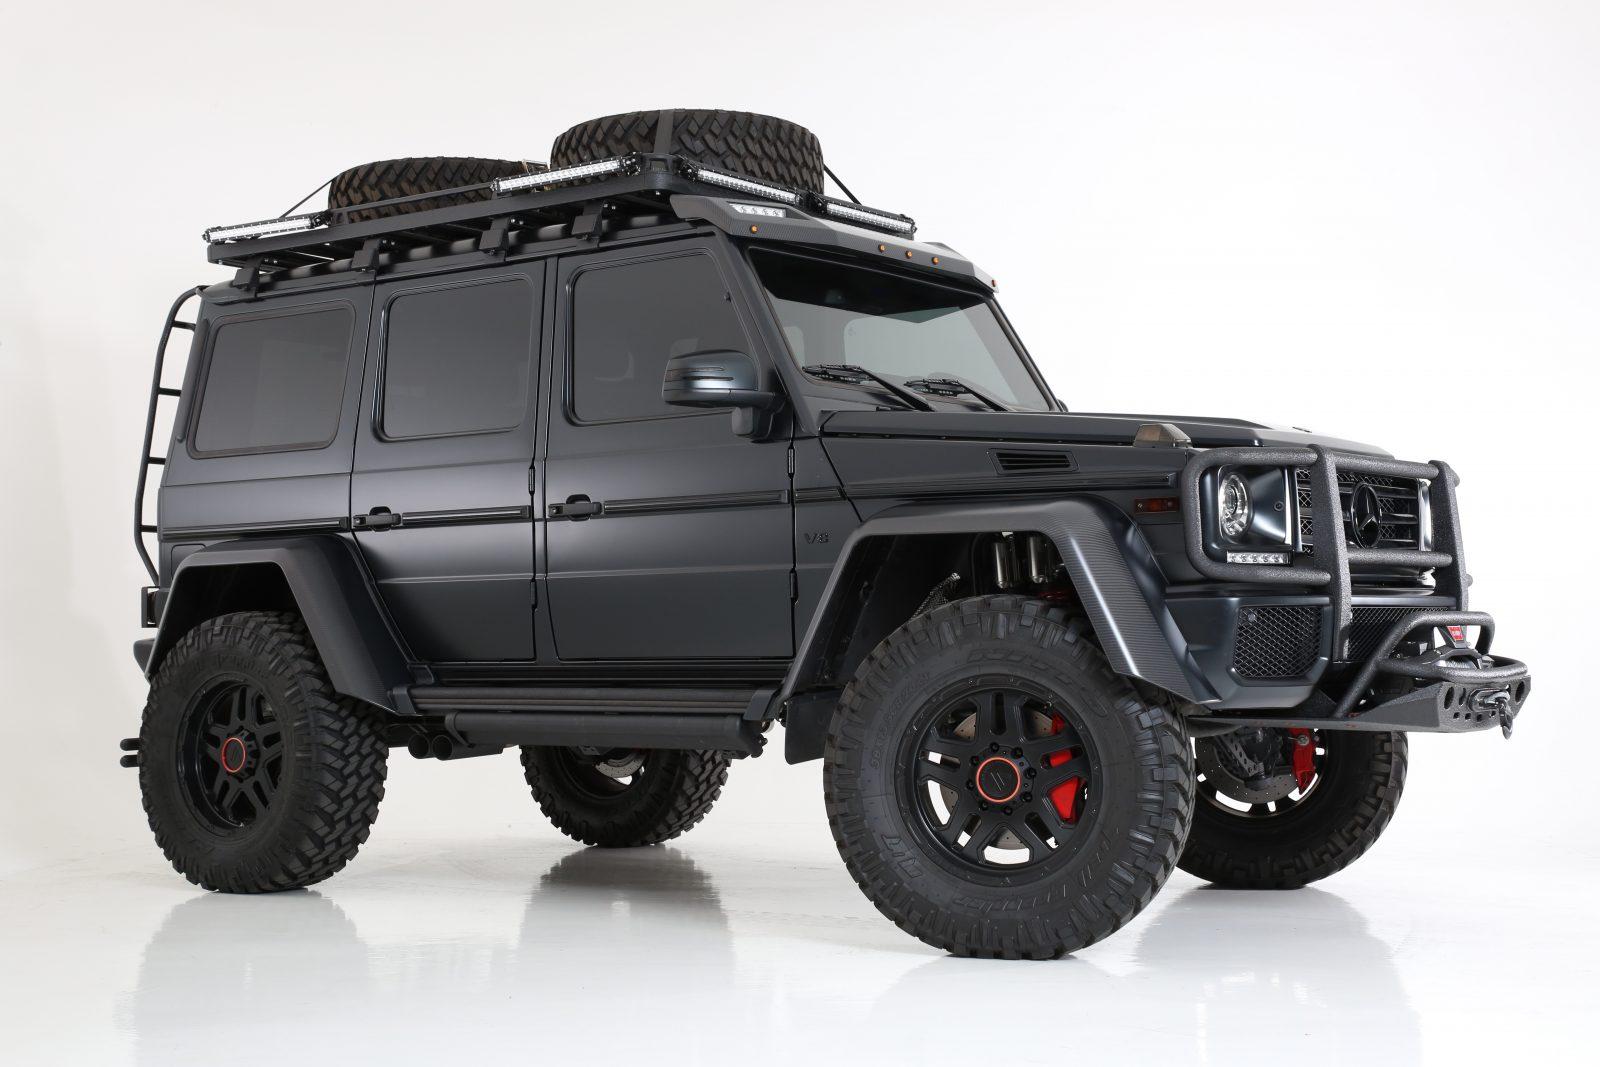 Mercedes Benz G-Wagon Blackout Package by All Star Motorsports